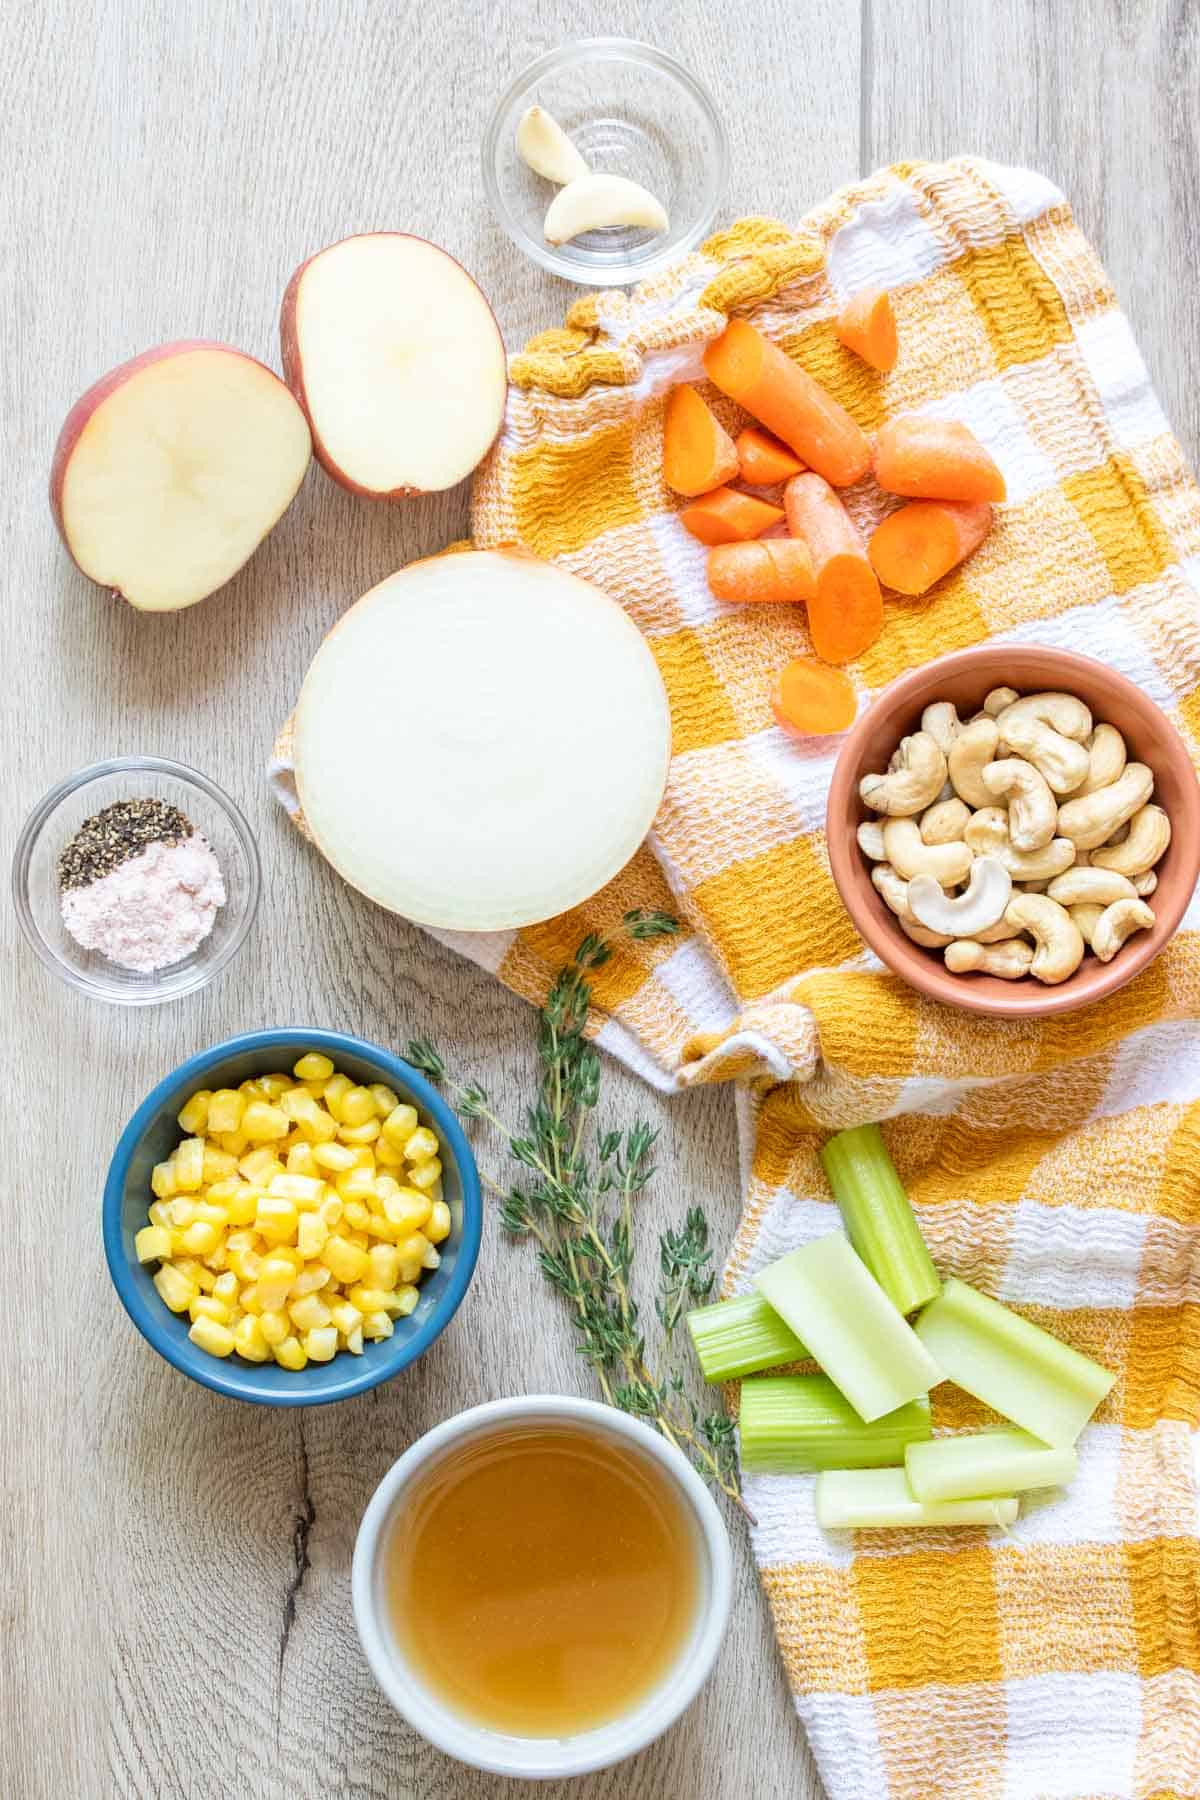 Ingredients needed to make corn chowder with a cashew base in bowls and on a wooden surface with a checkered towel